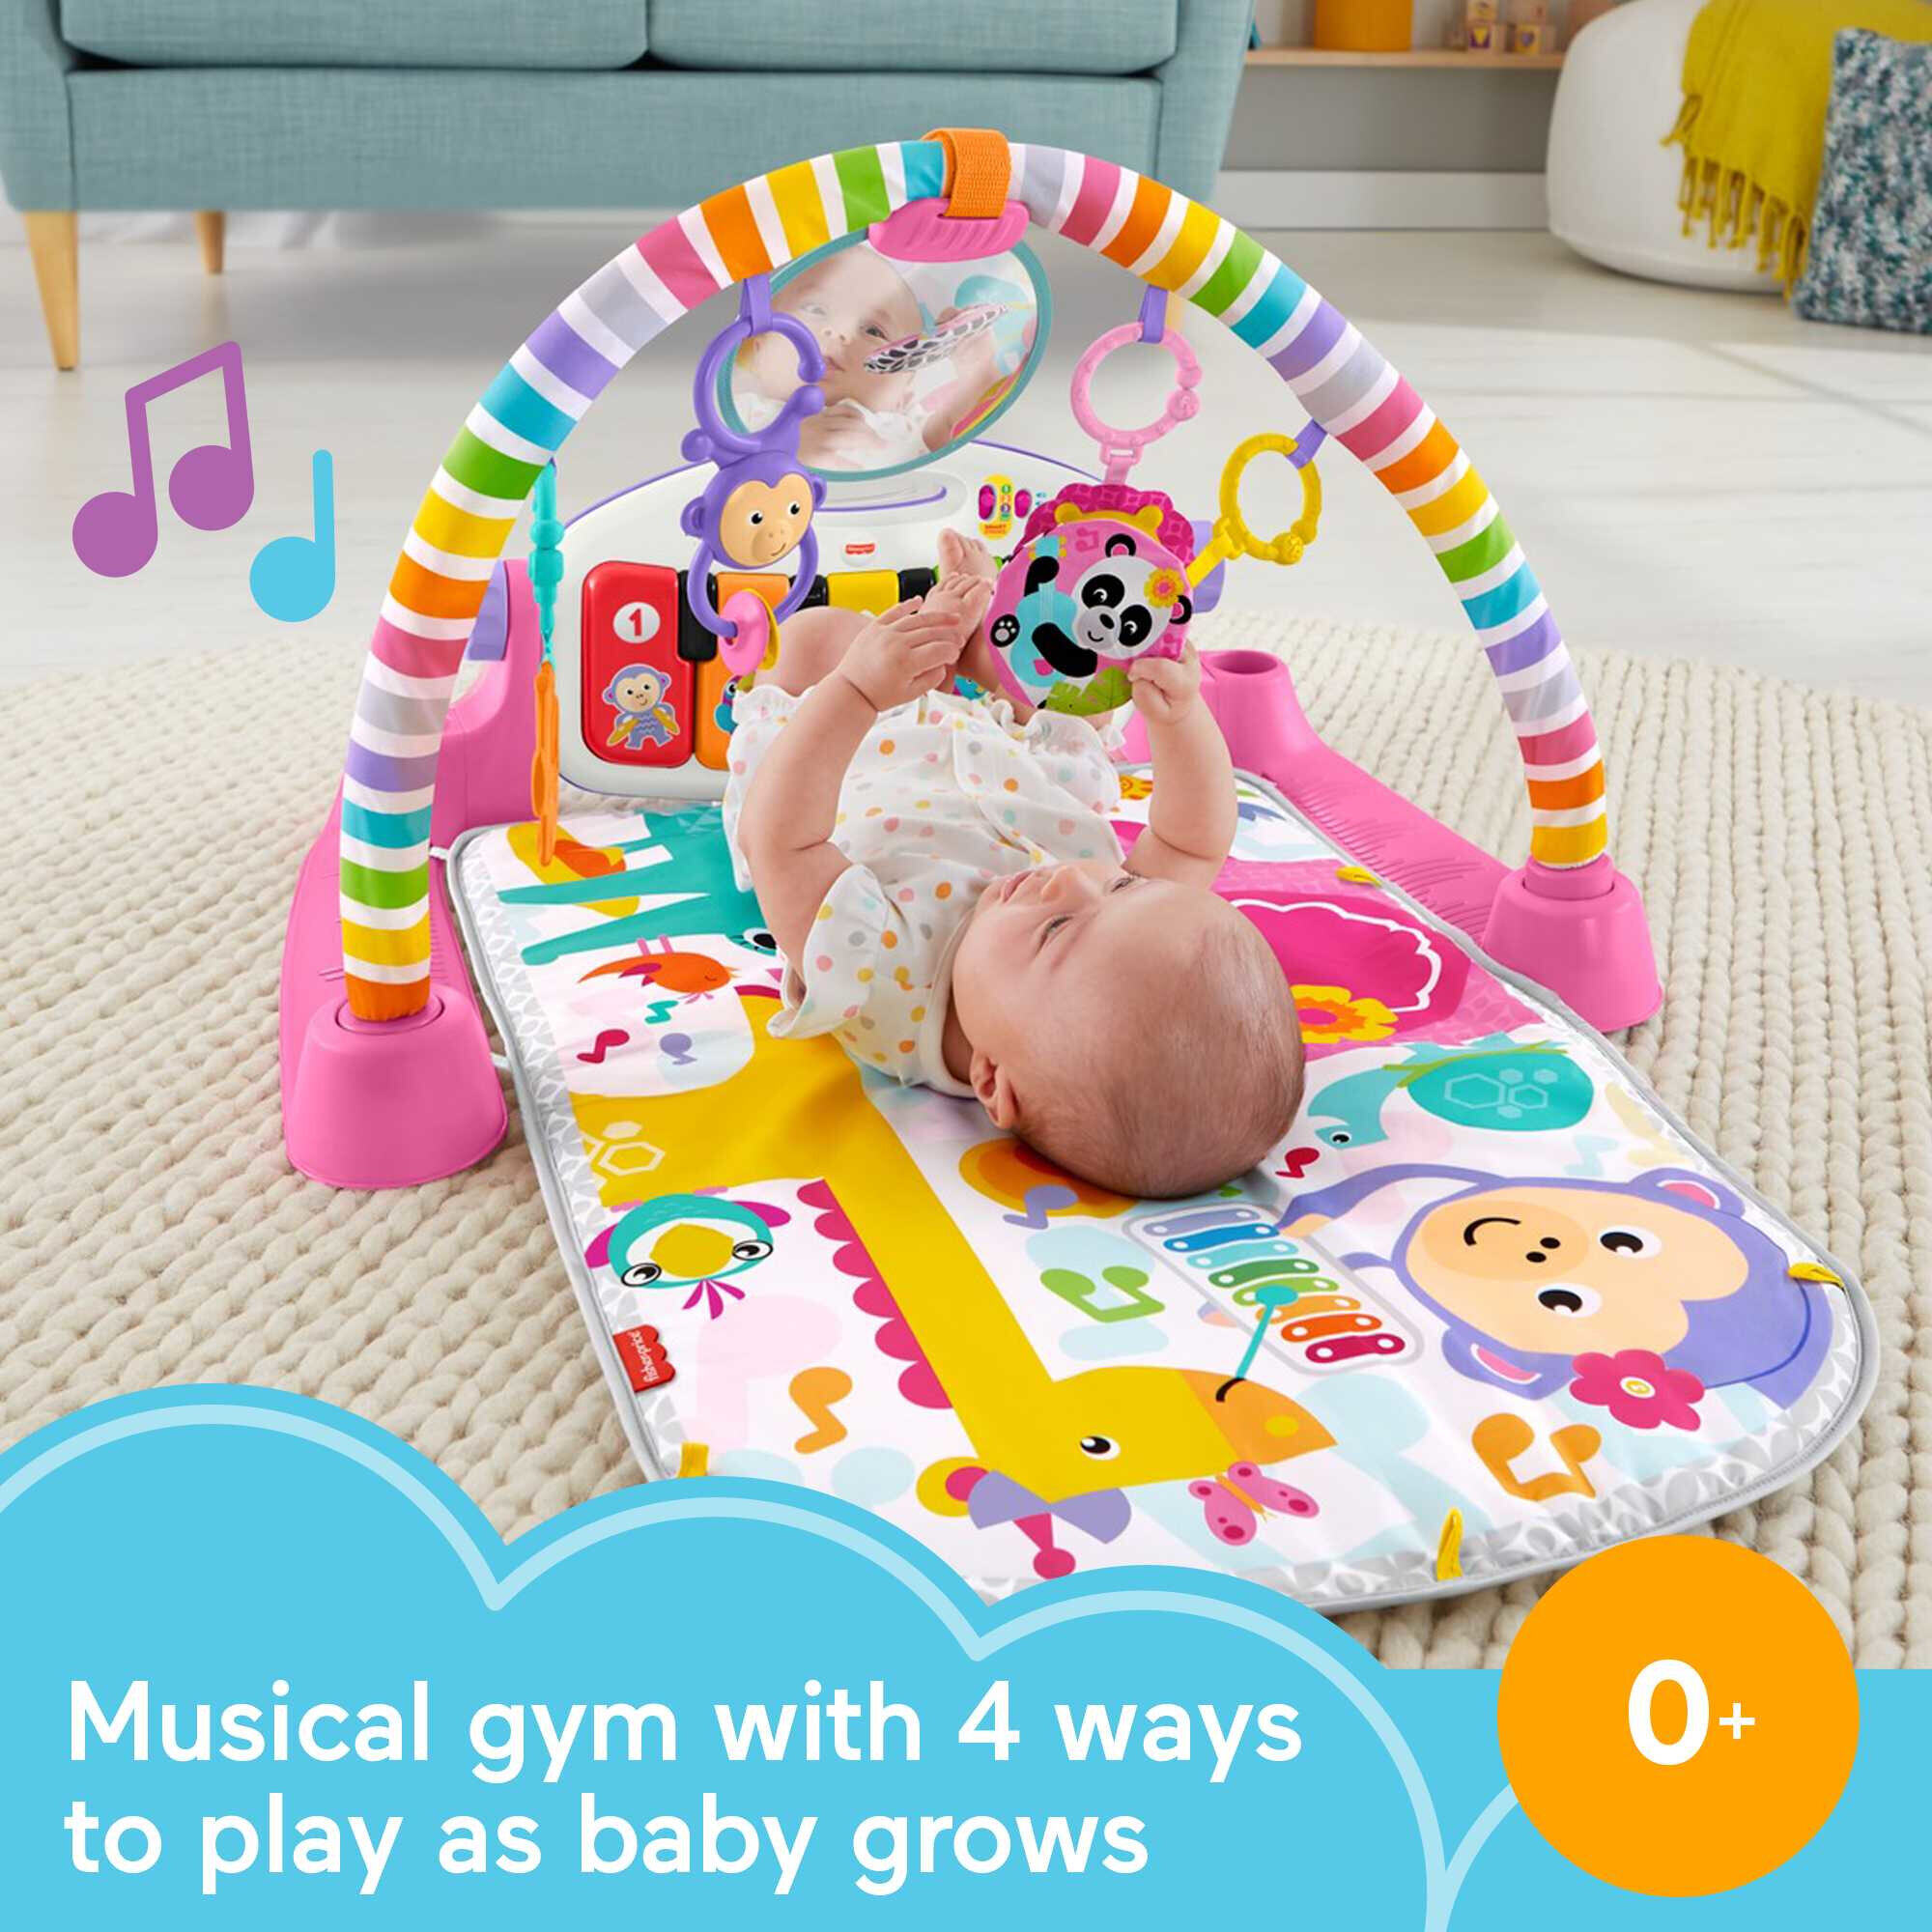 Fisher-Price Deluxe Play Piano Gym Baby Playmat with Electronic Toy, - Walmart.com